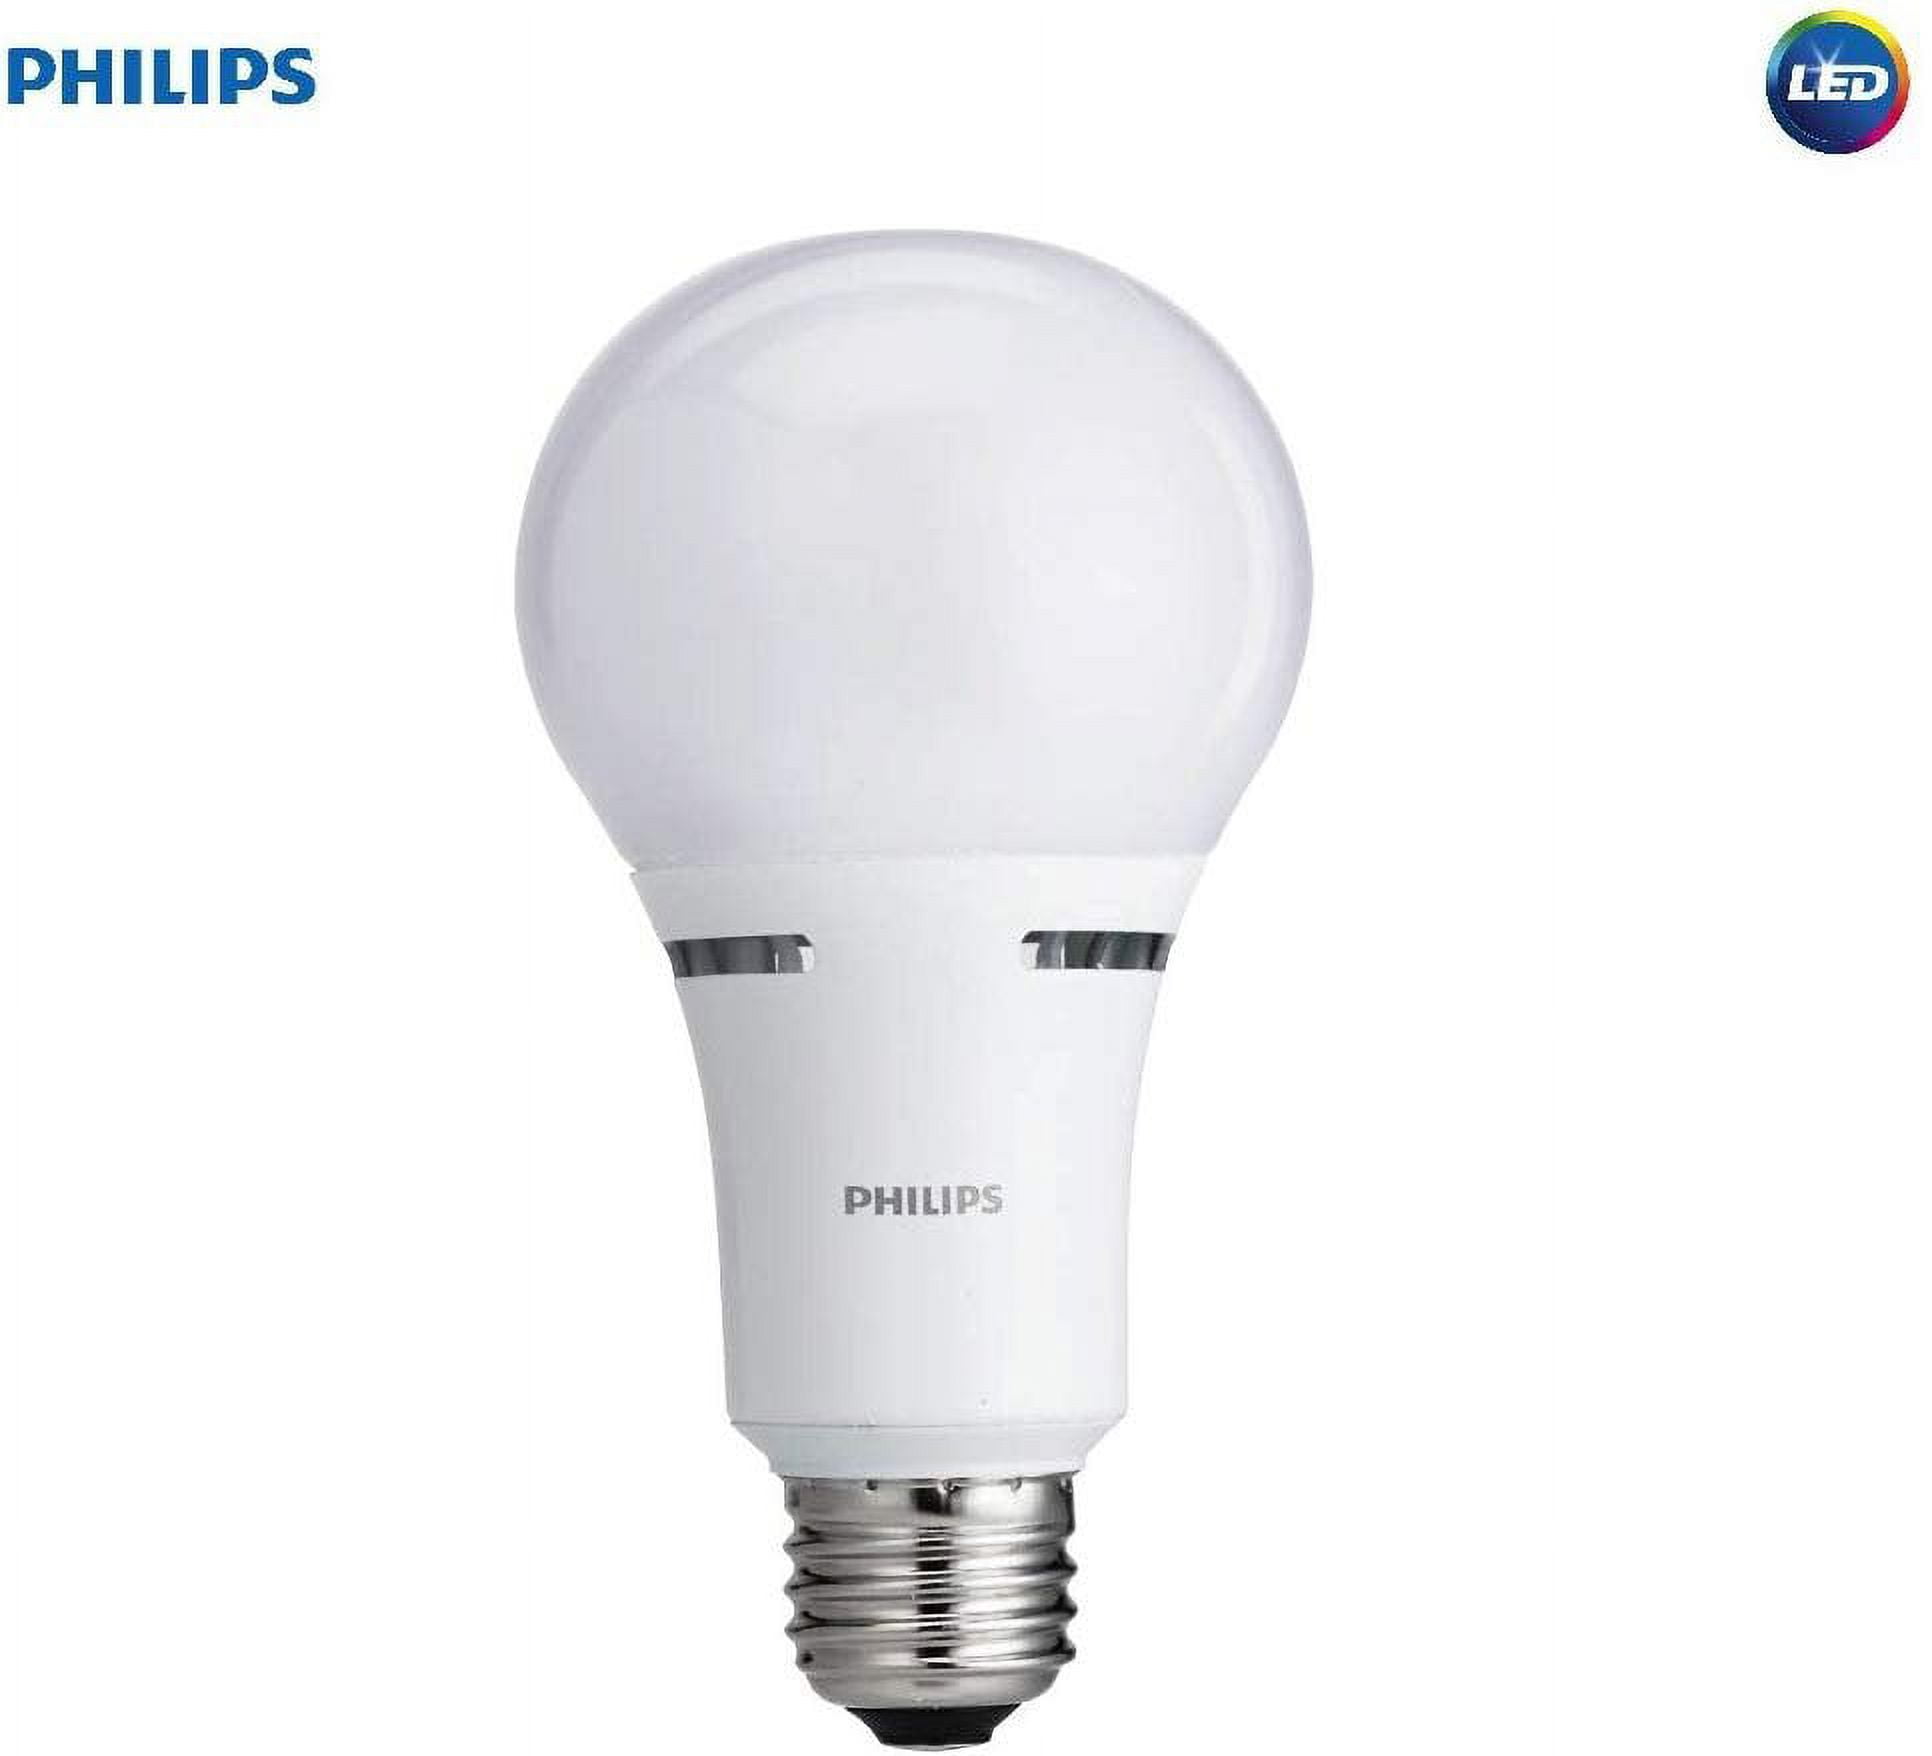 Philips LED 3-Way A21 Frosted Light Bulb: 1600-800-450-Lumen, 2700